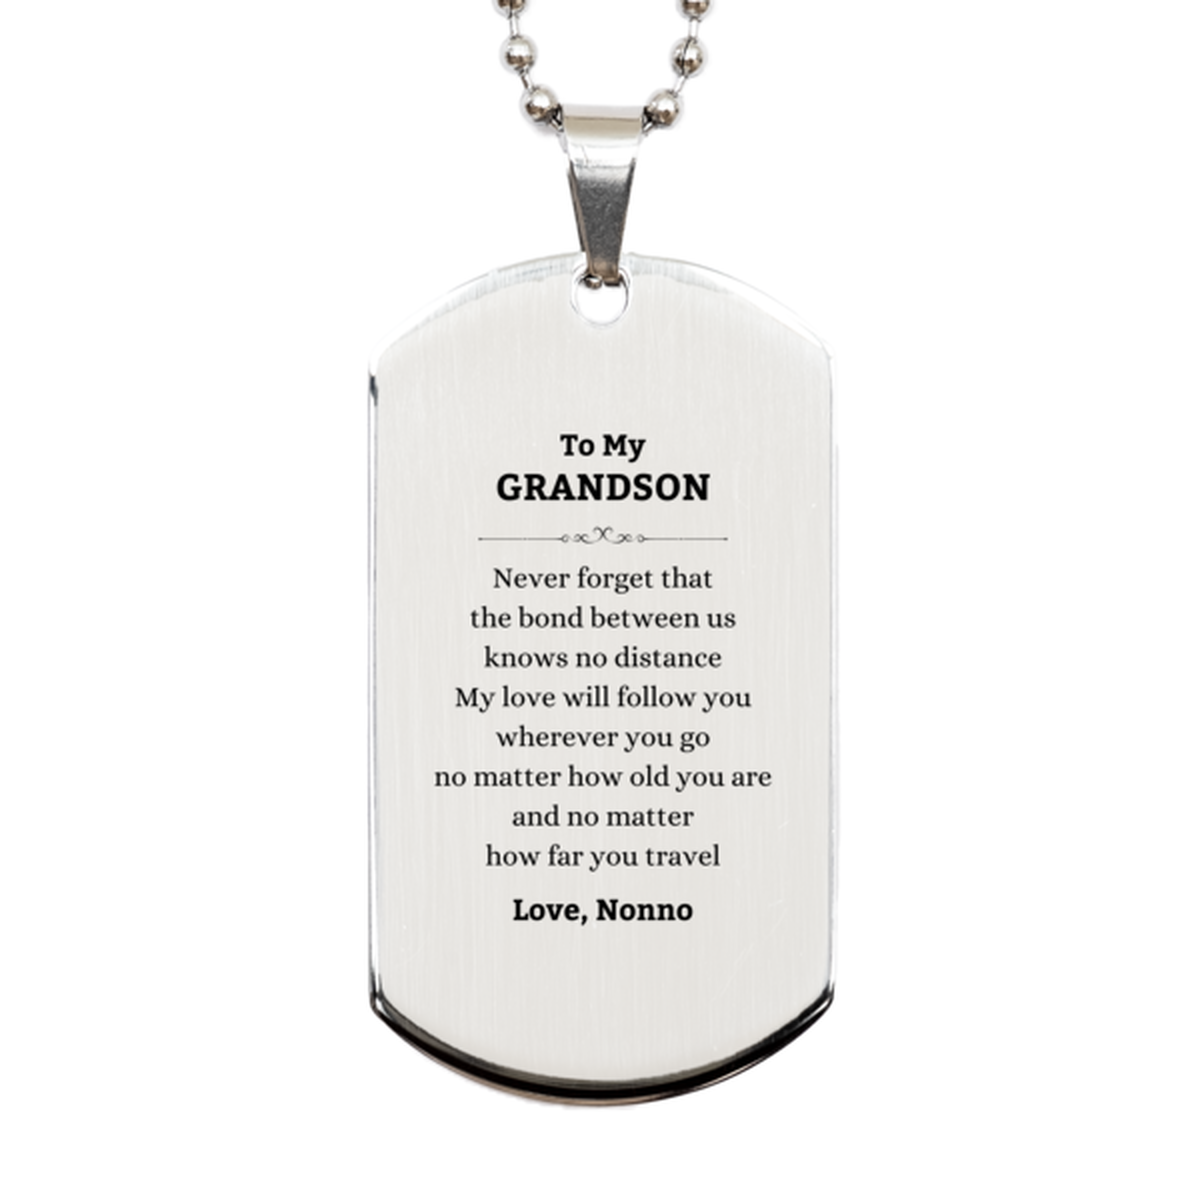 Grandson Birthday Gifts from Nonno, Adjustable Silver Dog Tag for Grandson Christmas Graduation Unique Gifts Grandson Never forget that the bond between us knows no distance. Love, Nonno